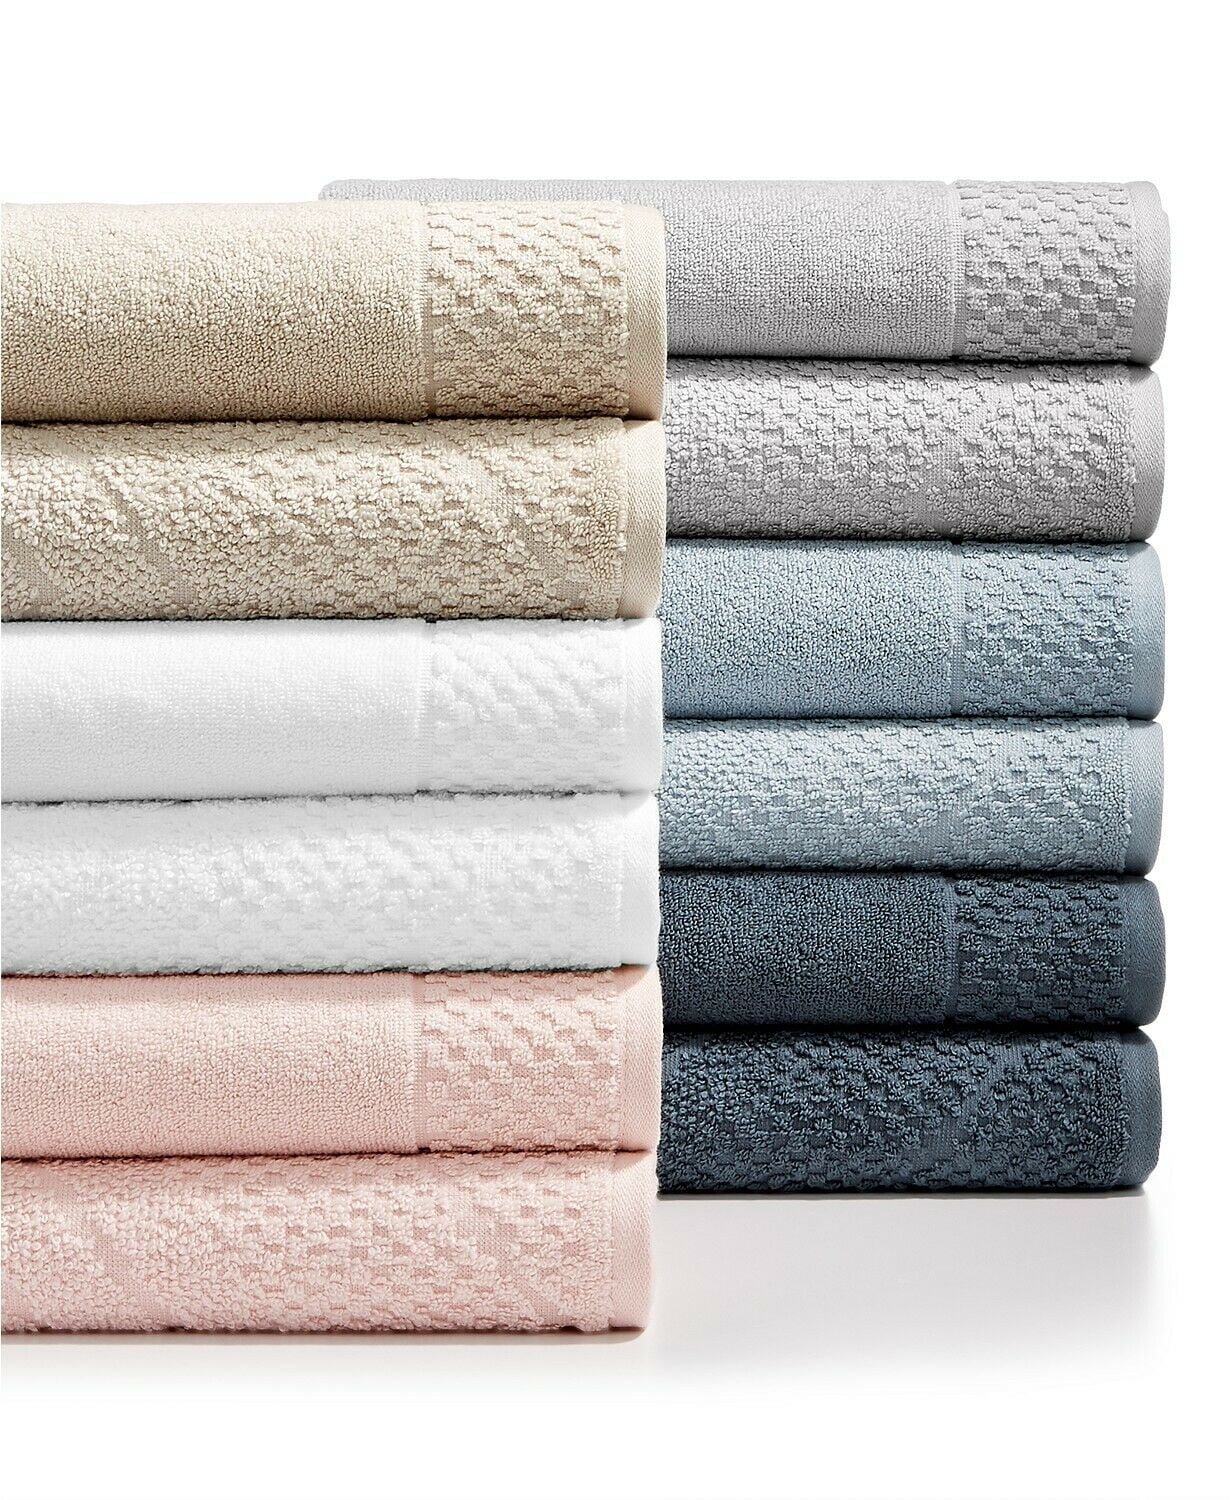 LEGIT PLUG STORE - CHANEL TOWEL SET🔌🔌 35$ Quality at an affordable price # towel #vacation #vacationmode